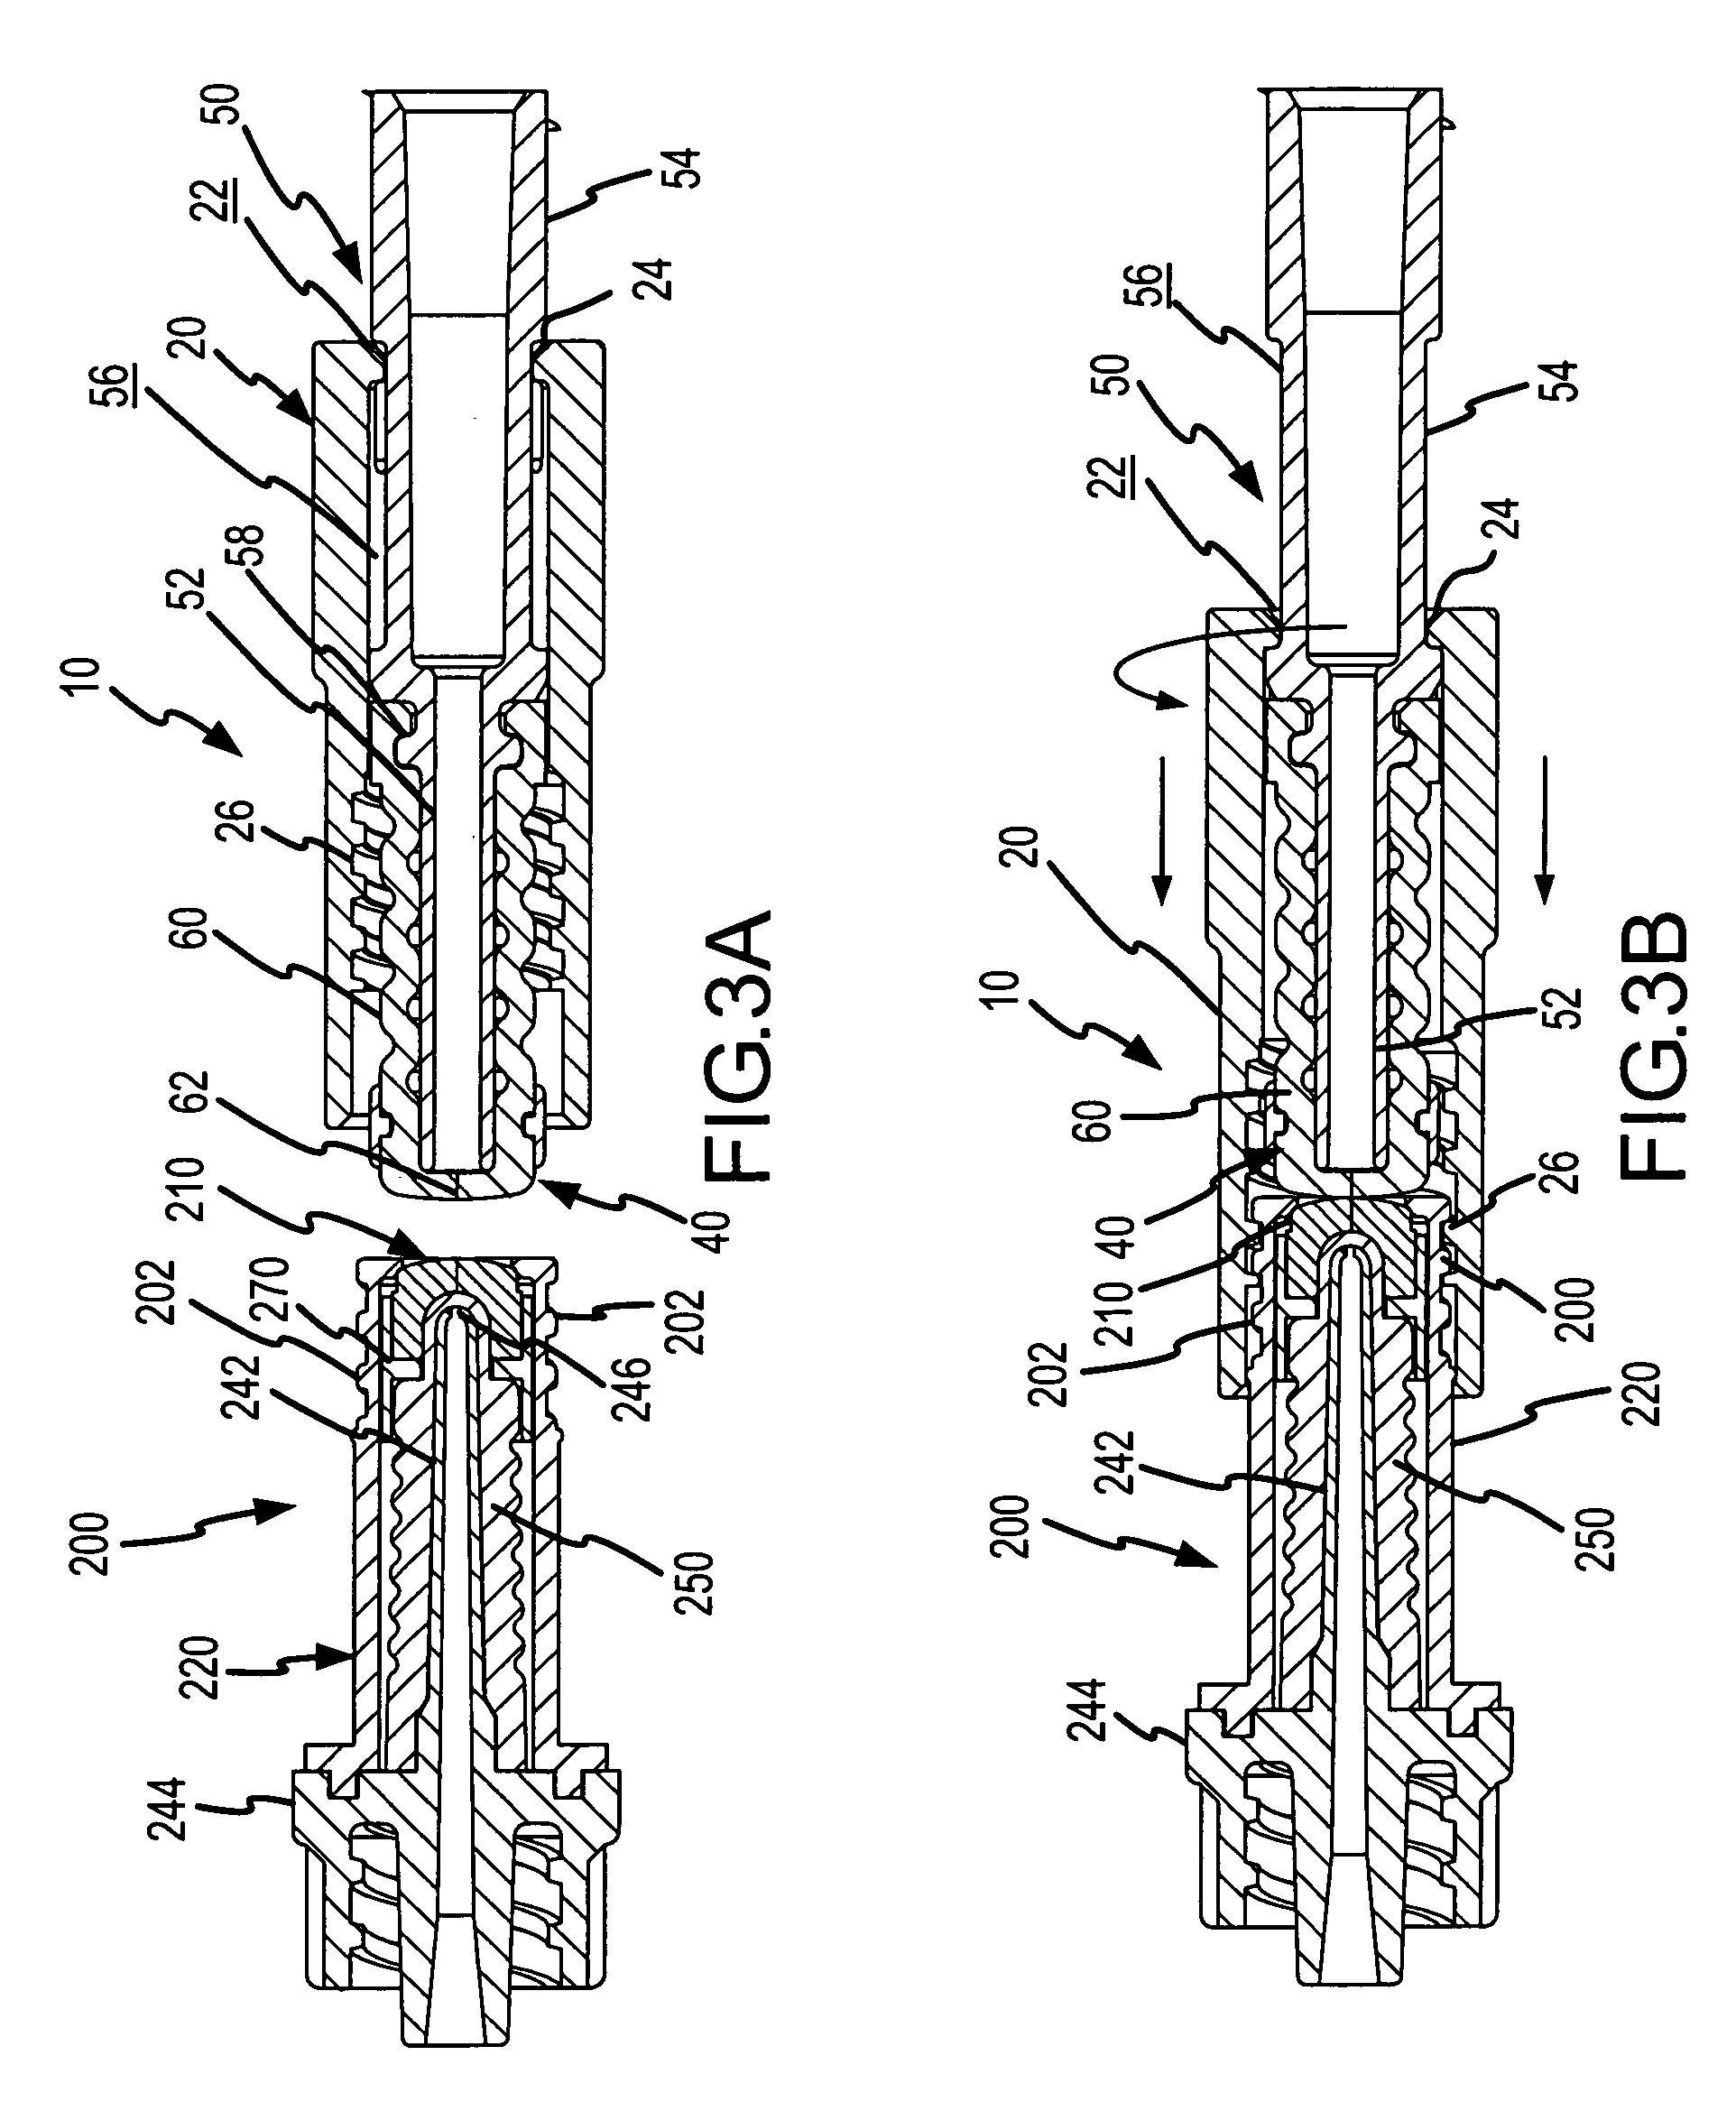 Swabable fluid connectors and fluid connector pairs